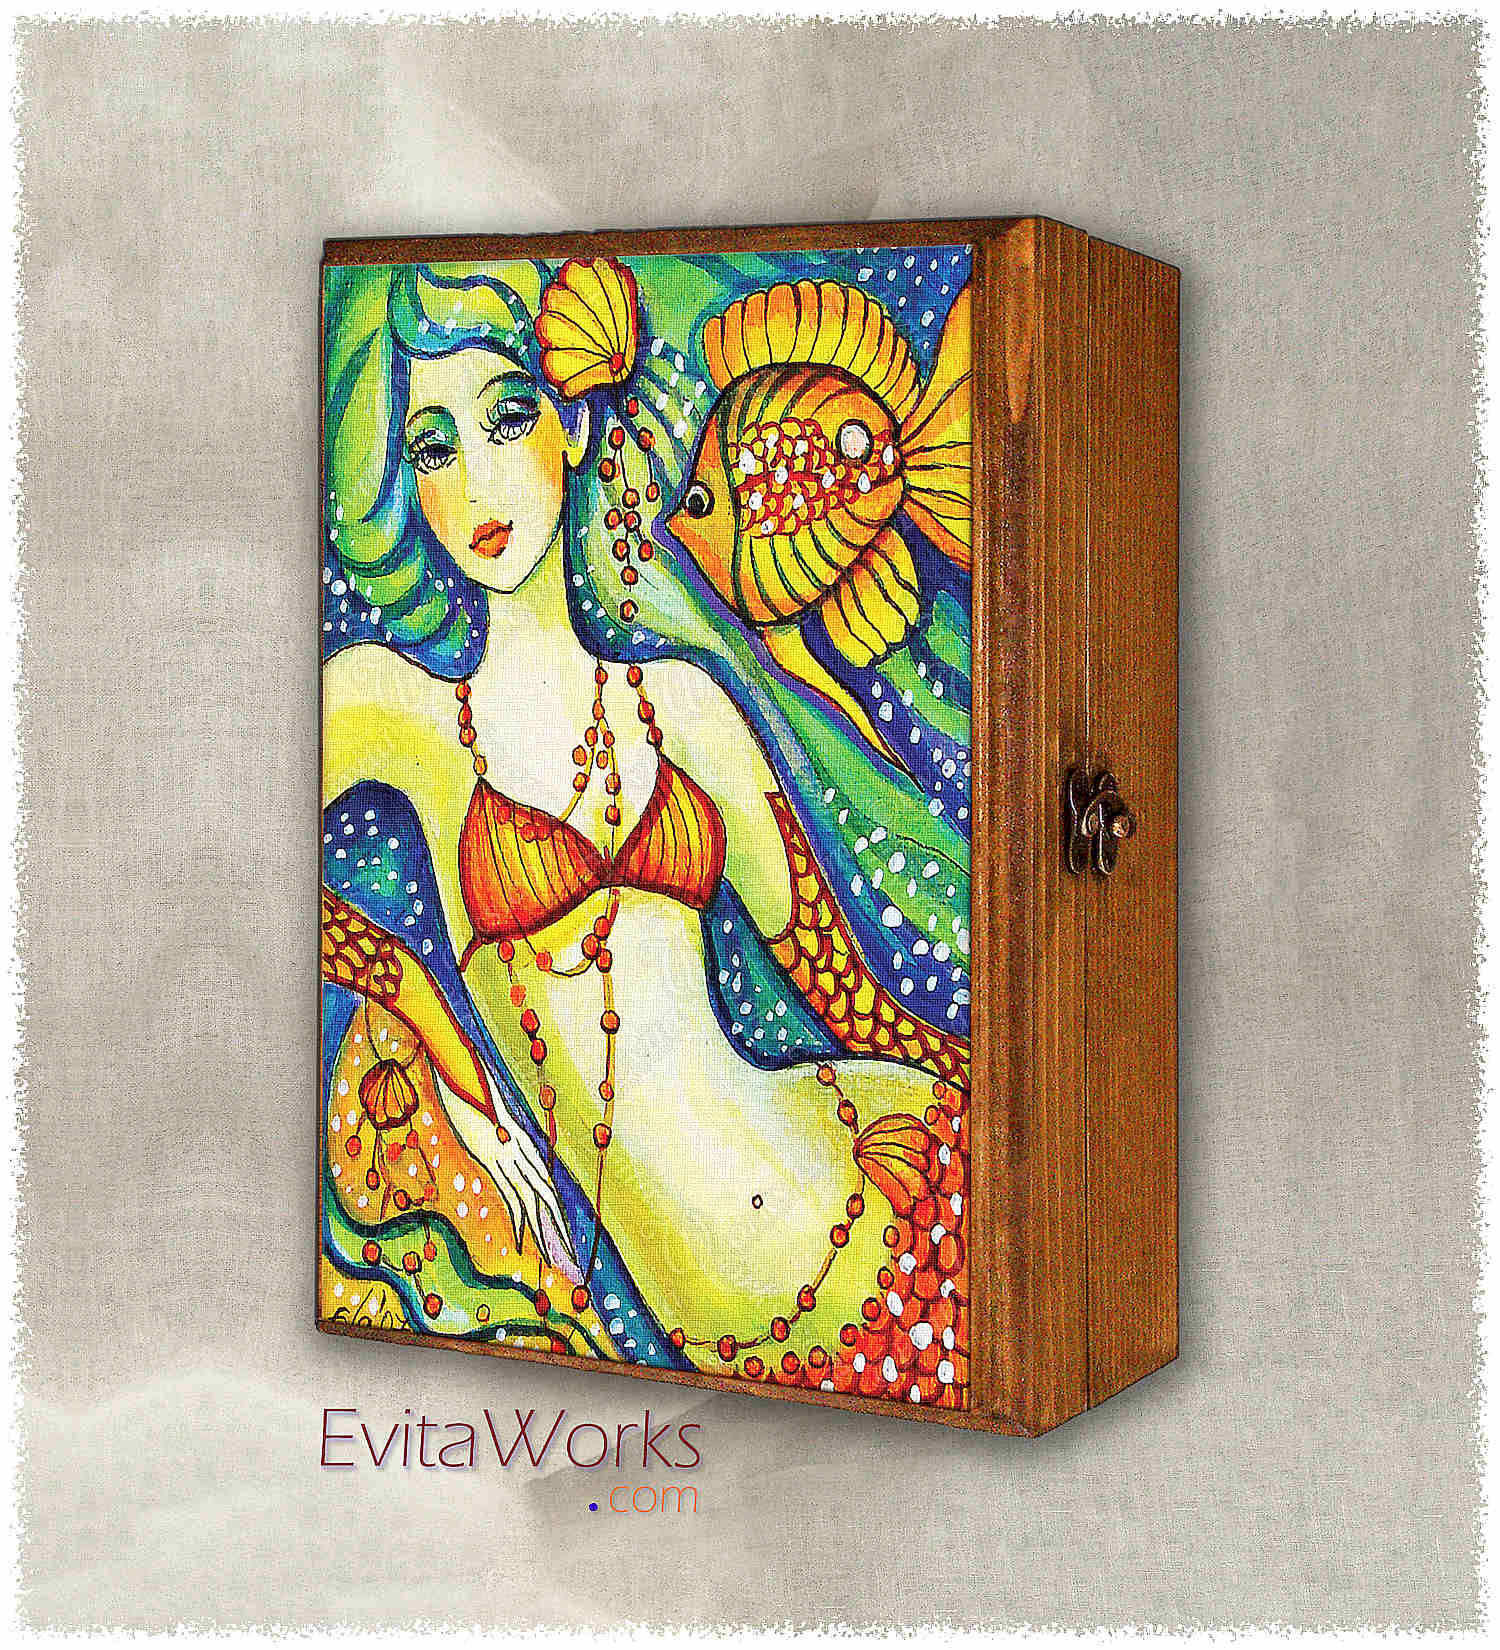 Hit to learn about "Mermaid 47, beautiful female creature" on jewelboxes